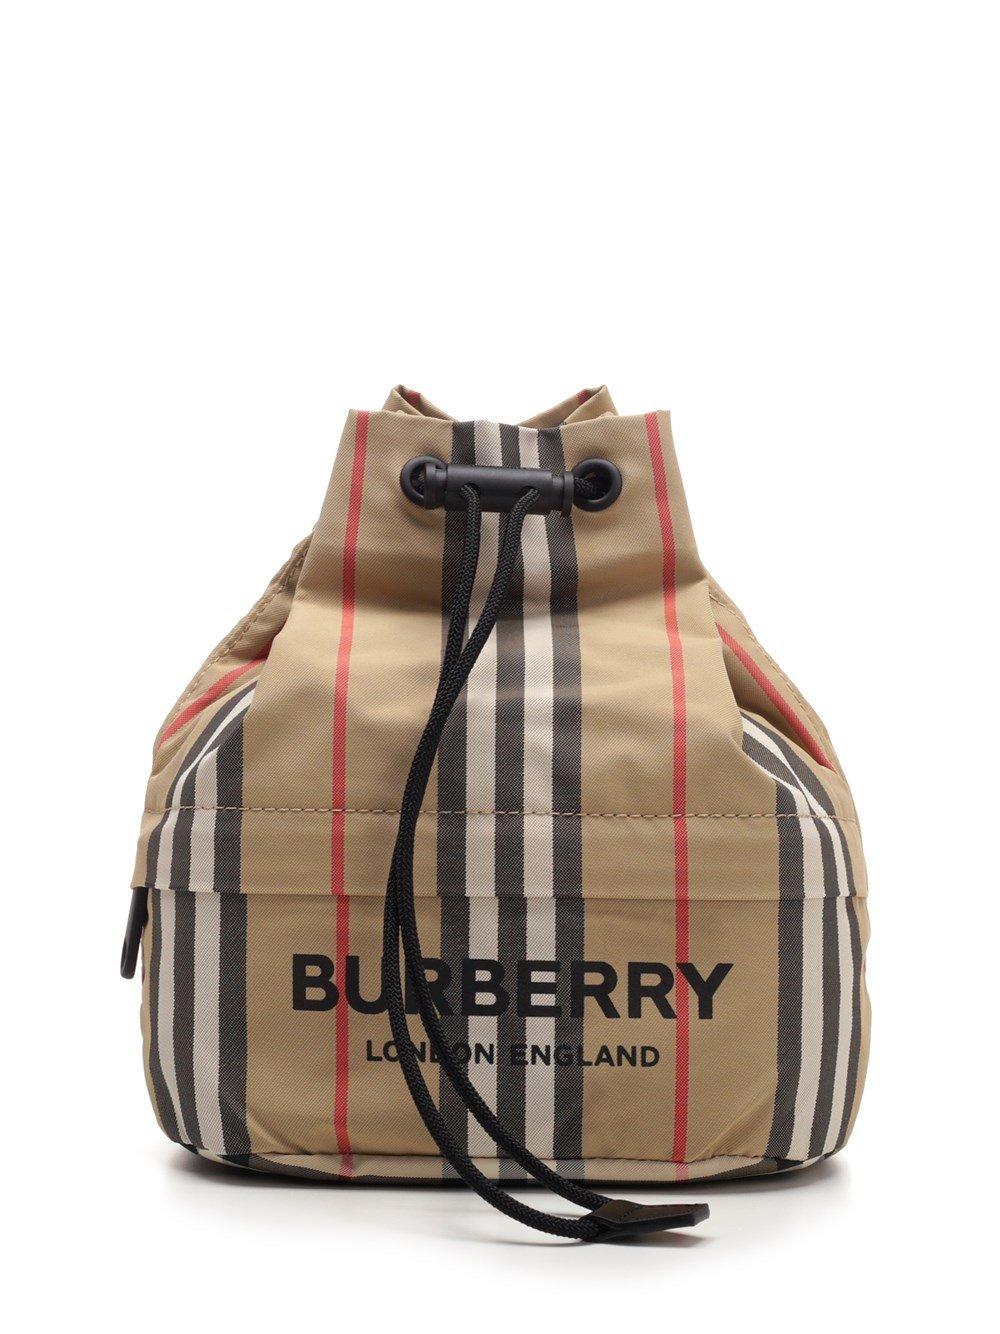 burberry phoebe pouch